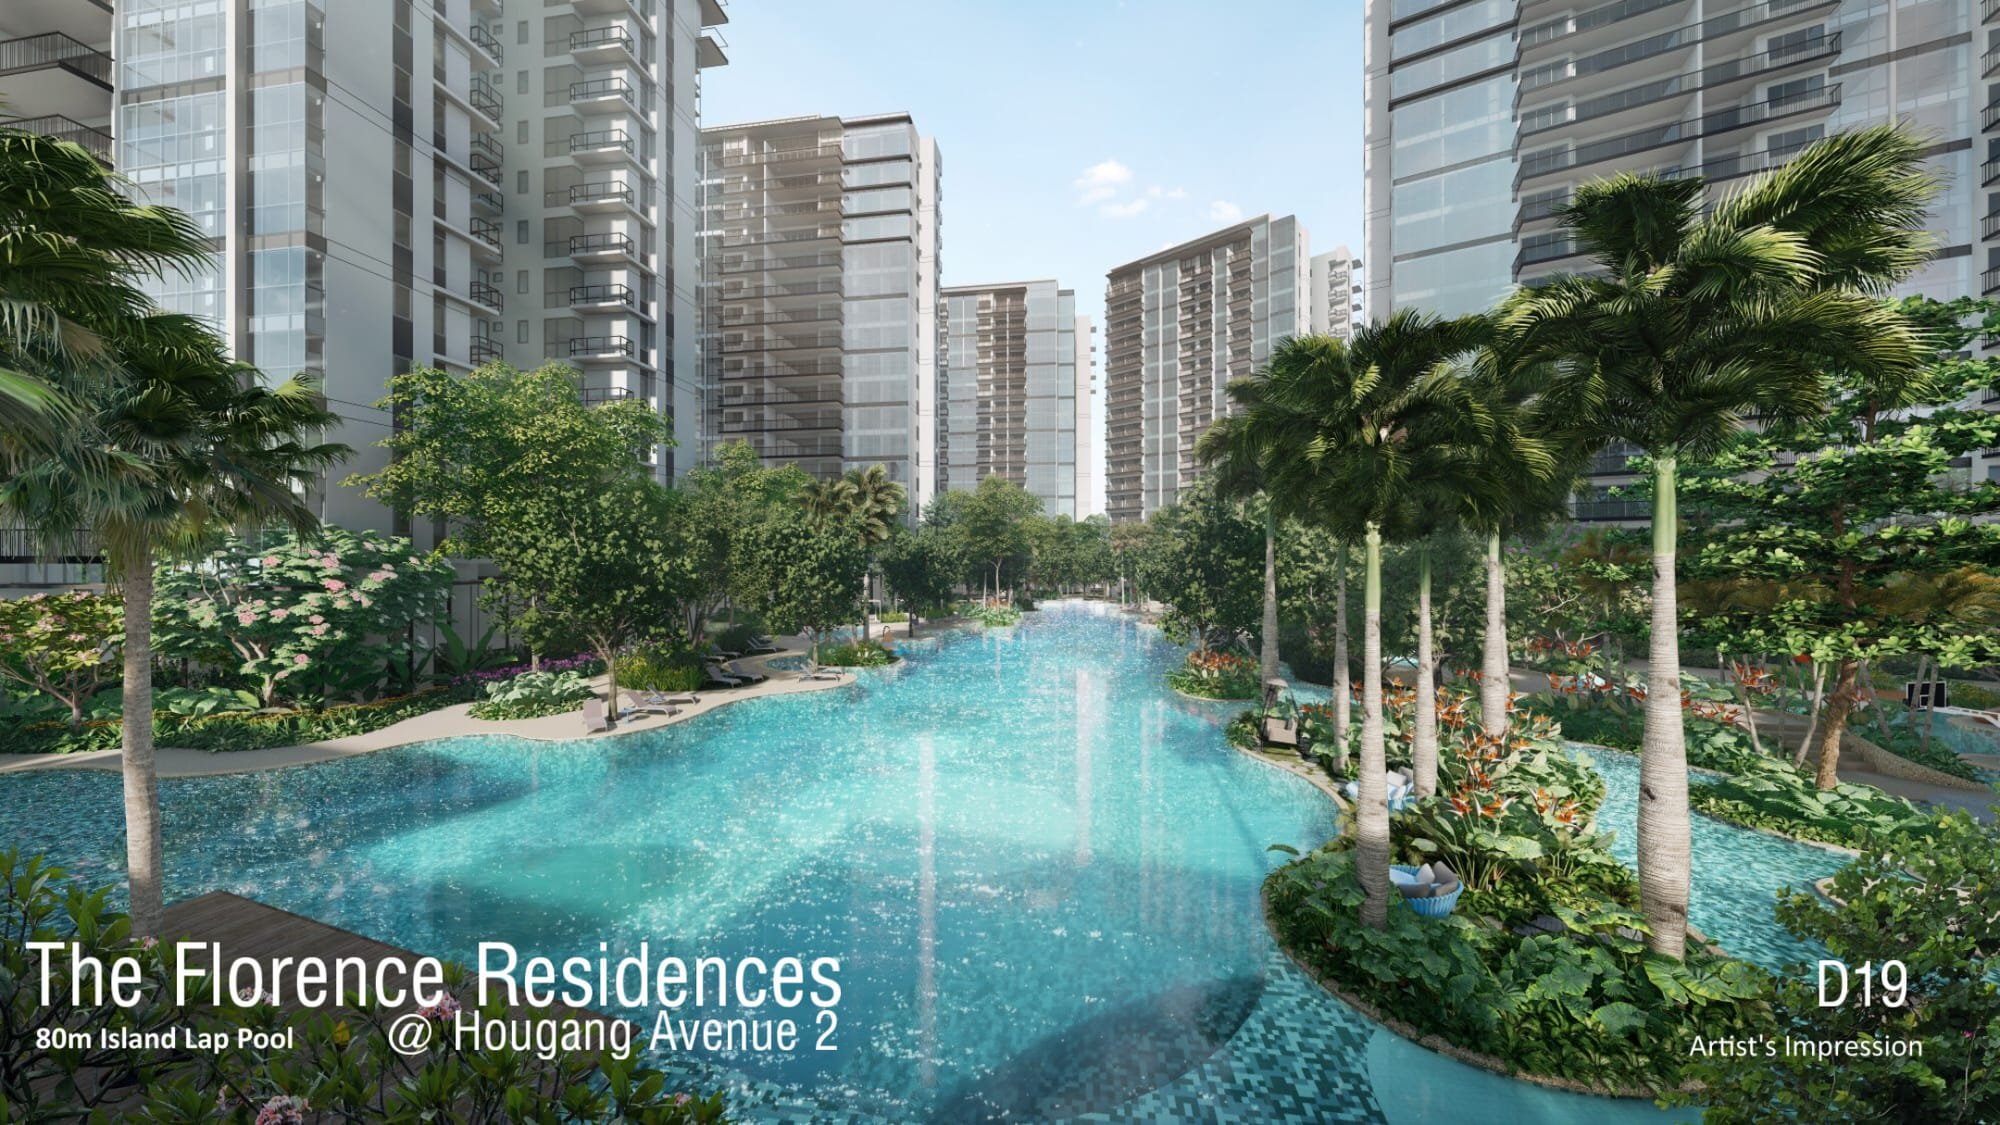 D19 The Florence Residences